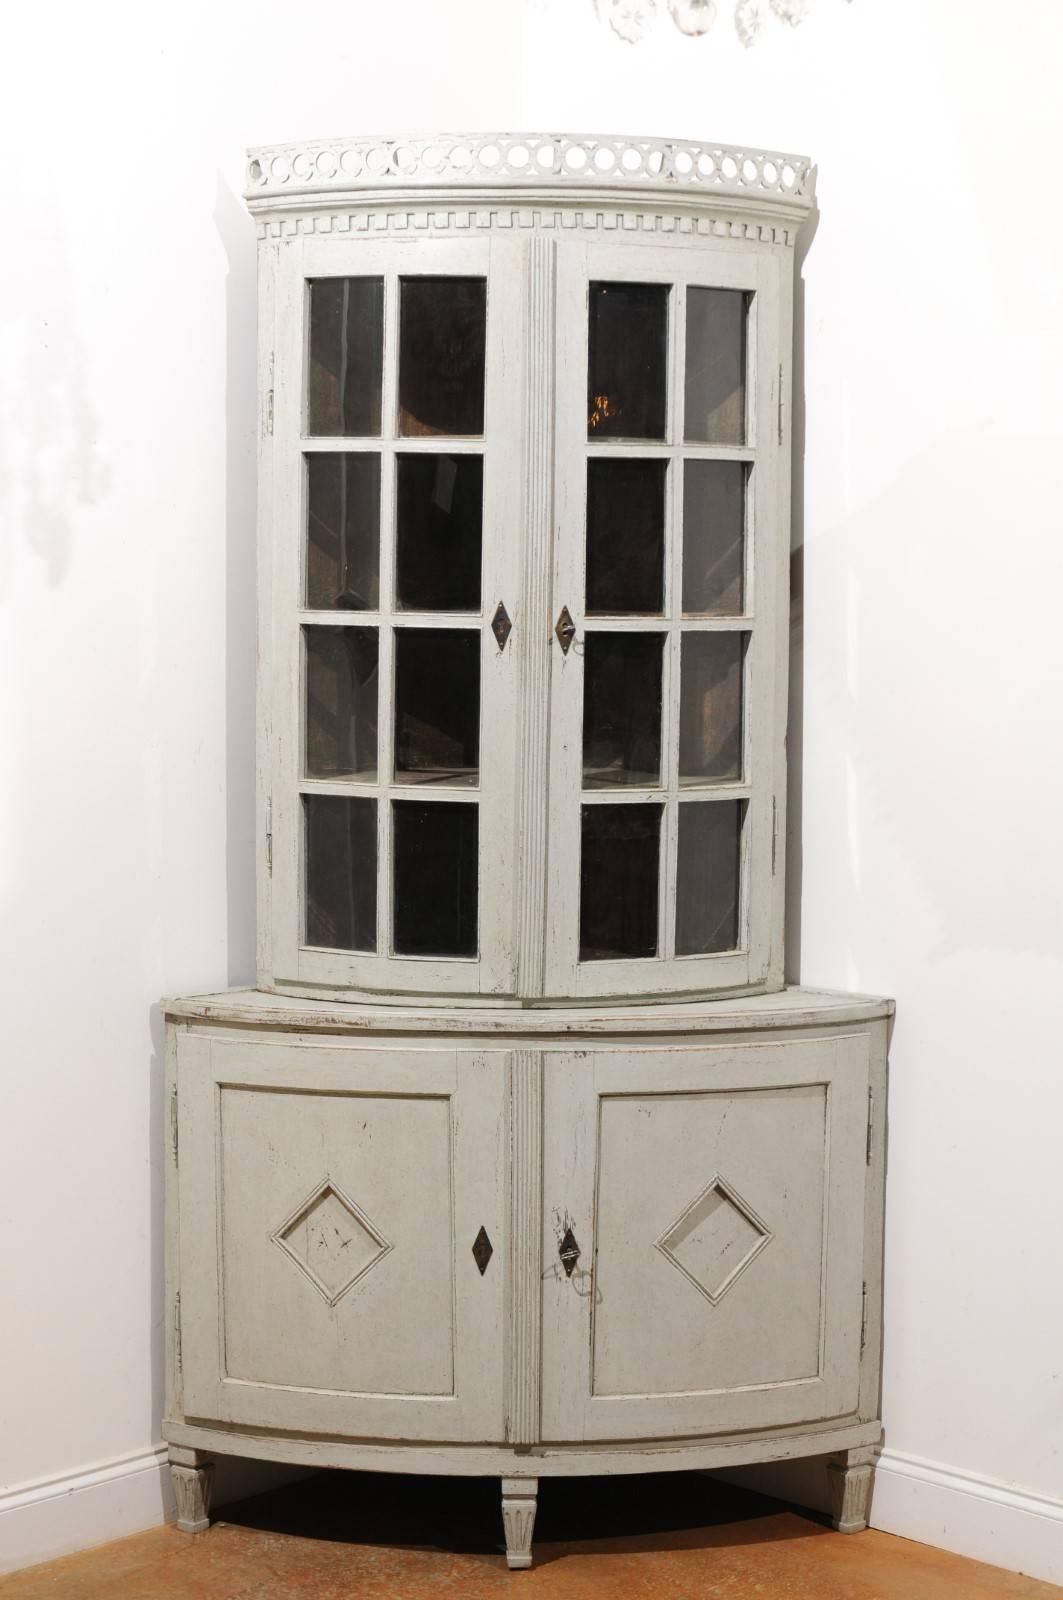 A Swedish Gustavian style painted corner cabinet from the mid-19th century with glass doors, pierced cornice and diamond motifs. This exquisite Swedish corner cabinet features a convex façade, adorned with a pierced cornice at the top, overhanging a